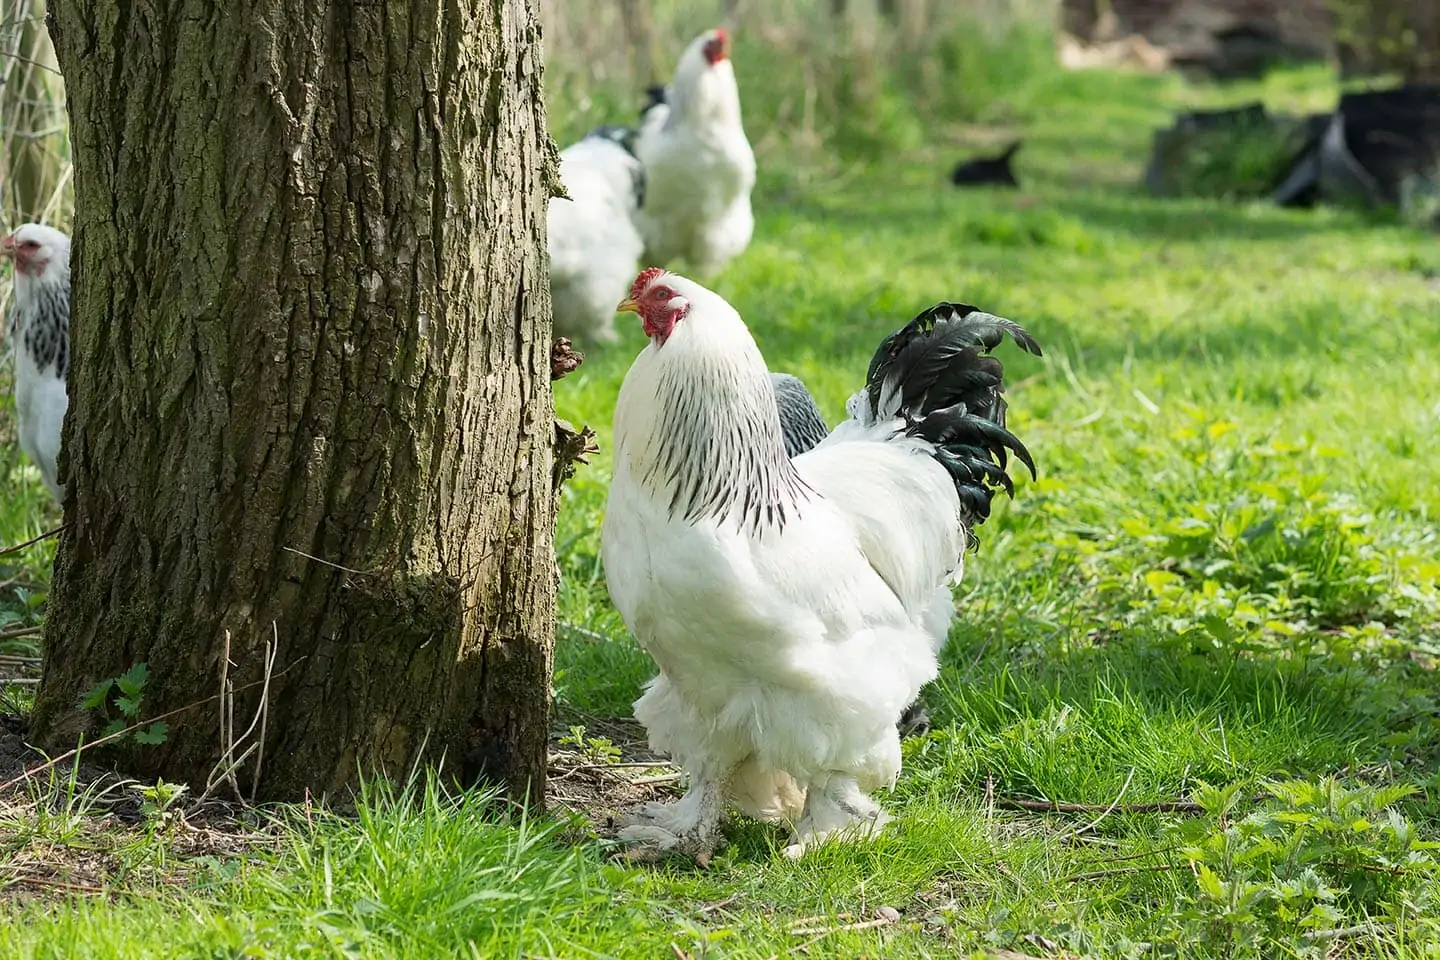 Sex and Mating in Brahma Chickens